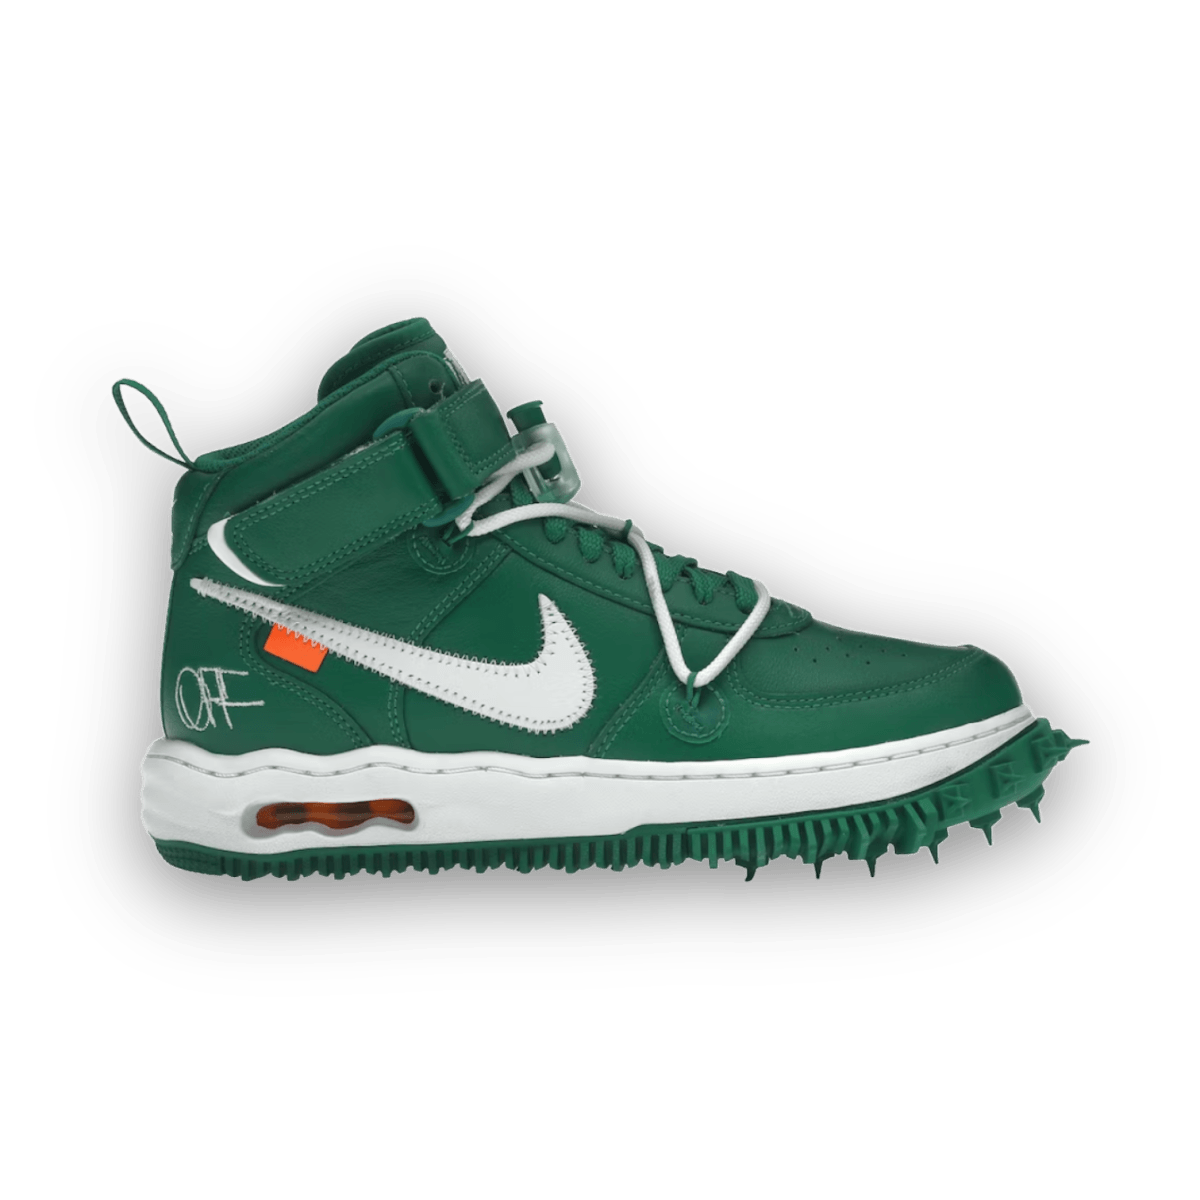 Off-White x Air Force 1 Mid SP Leather 'Pine Green' - Low Sneaker - Jawns on Fire Sneakers & Streetwear